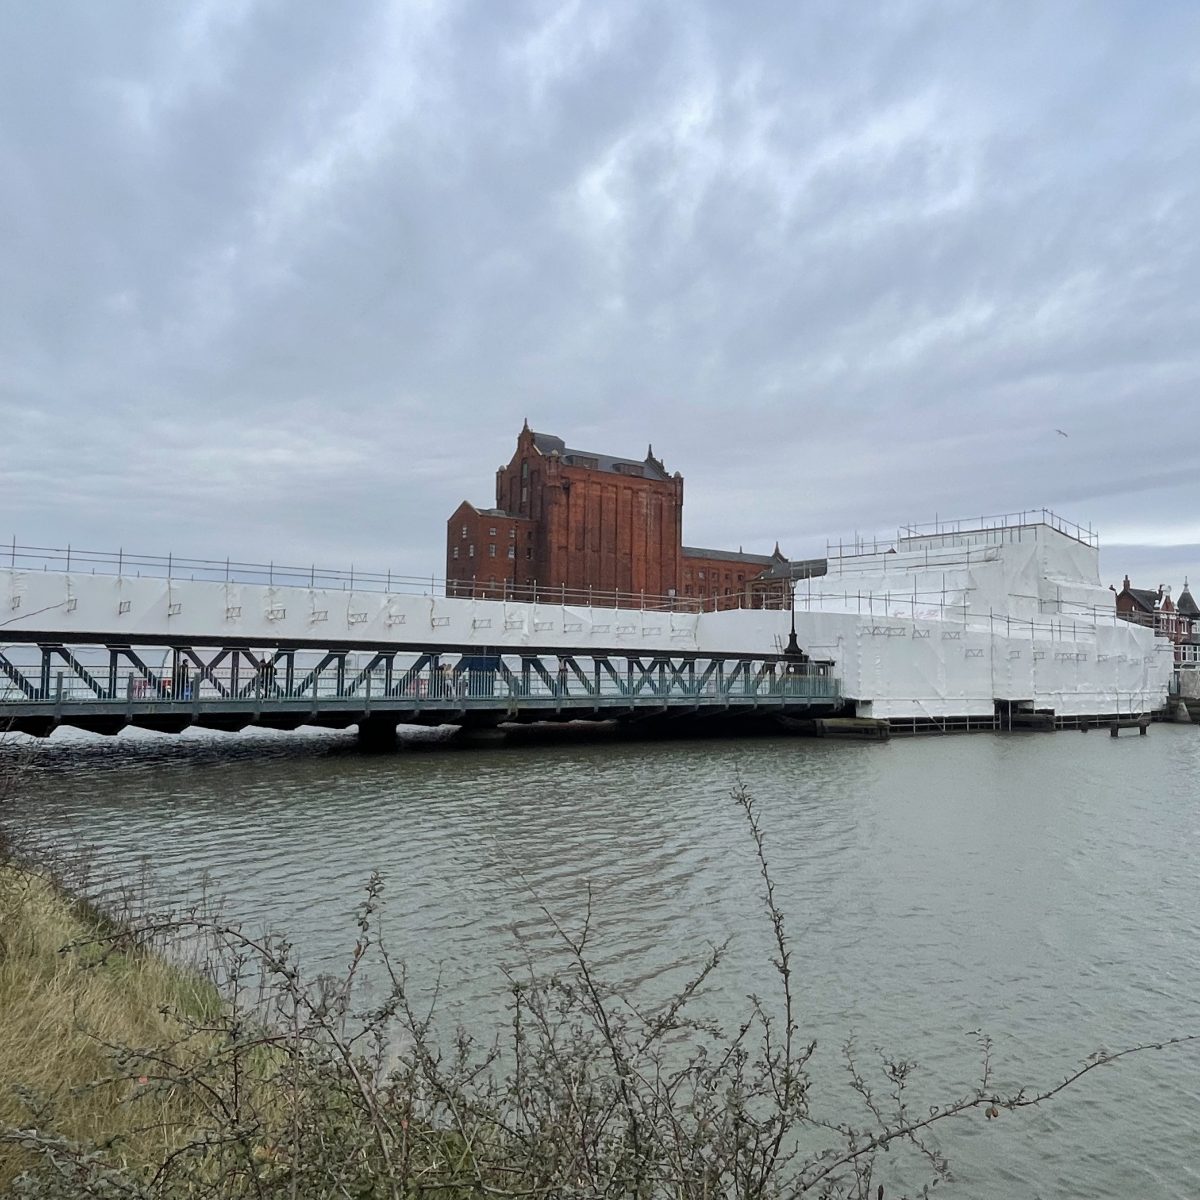 A photo of Corporation Road Bridge taken from a nearby wharf